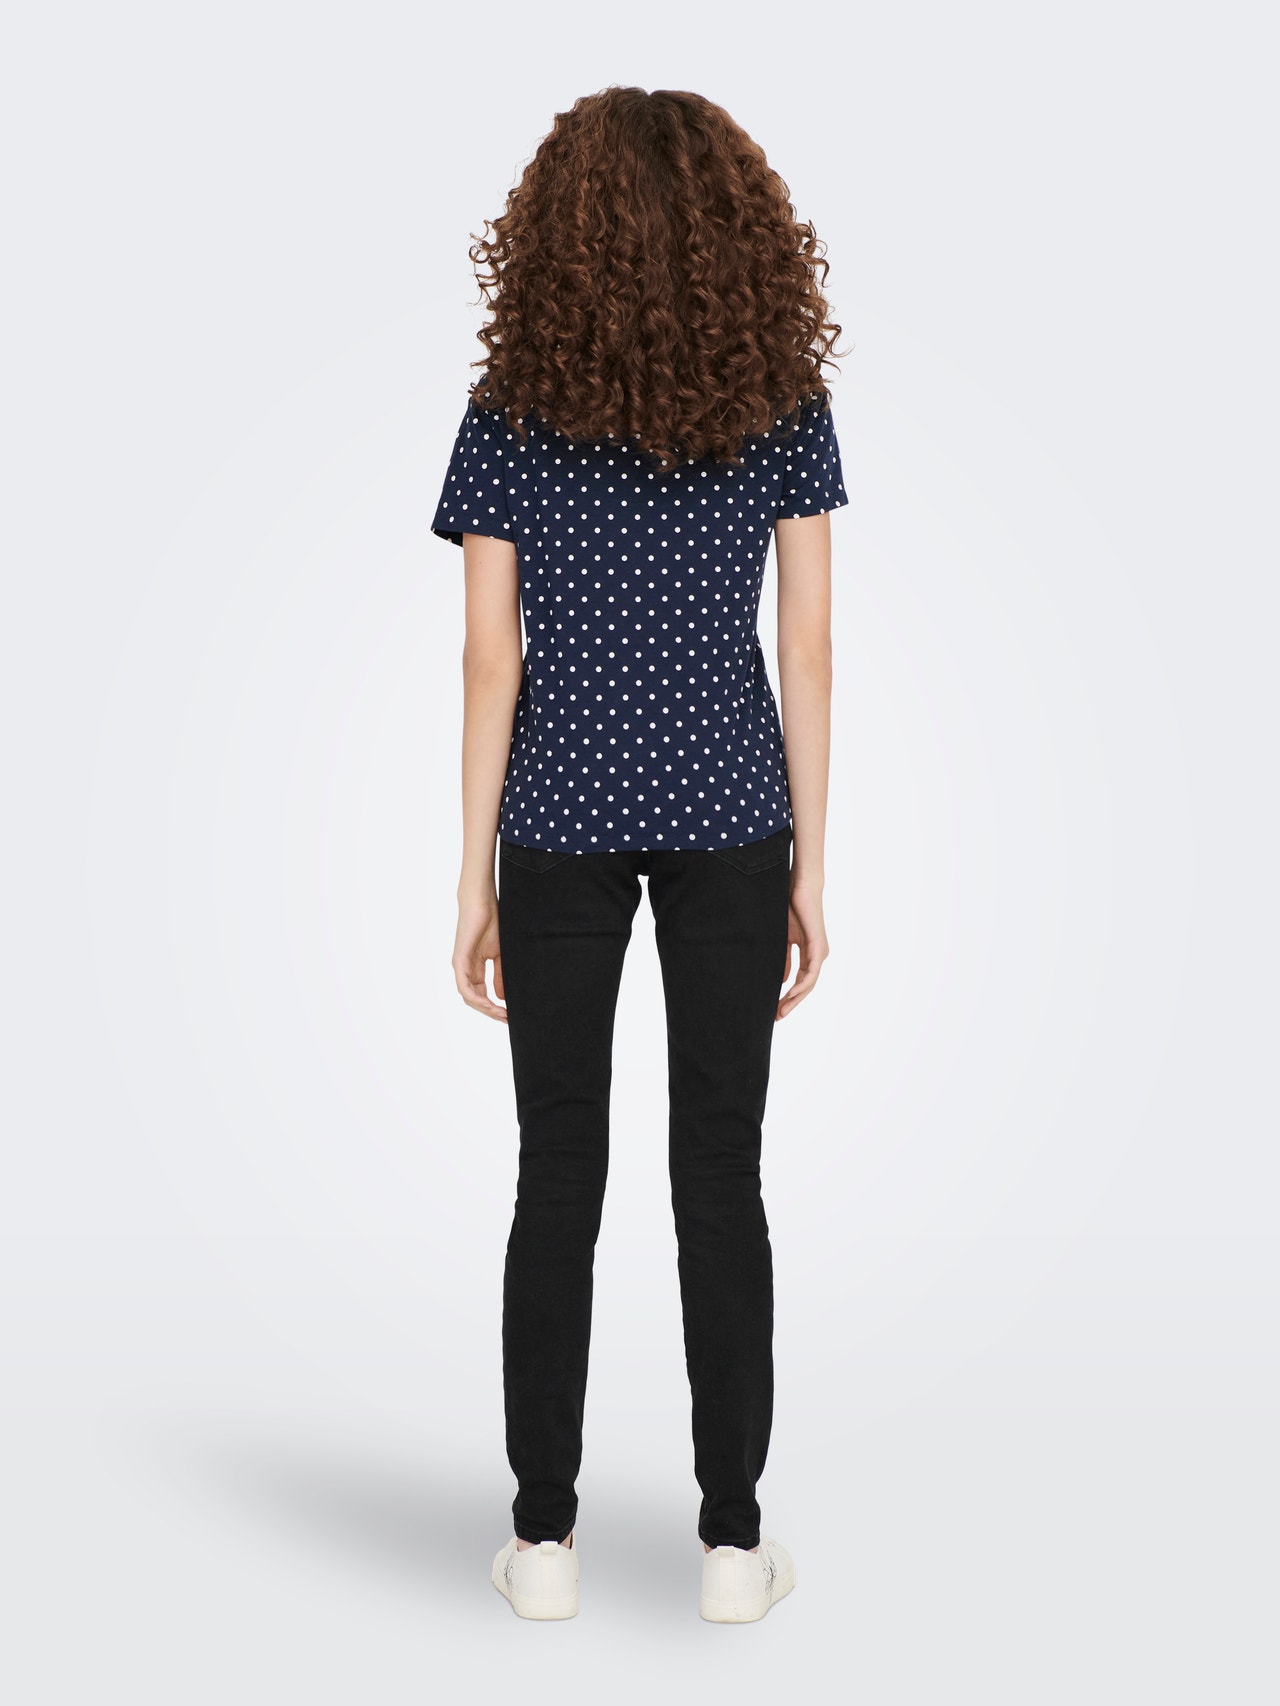 ONLY Dotted T-shirt -Sky Captain - 15277912